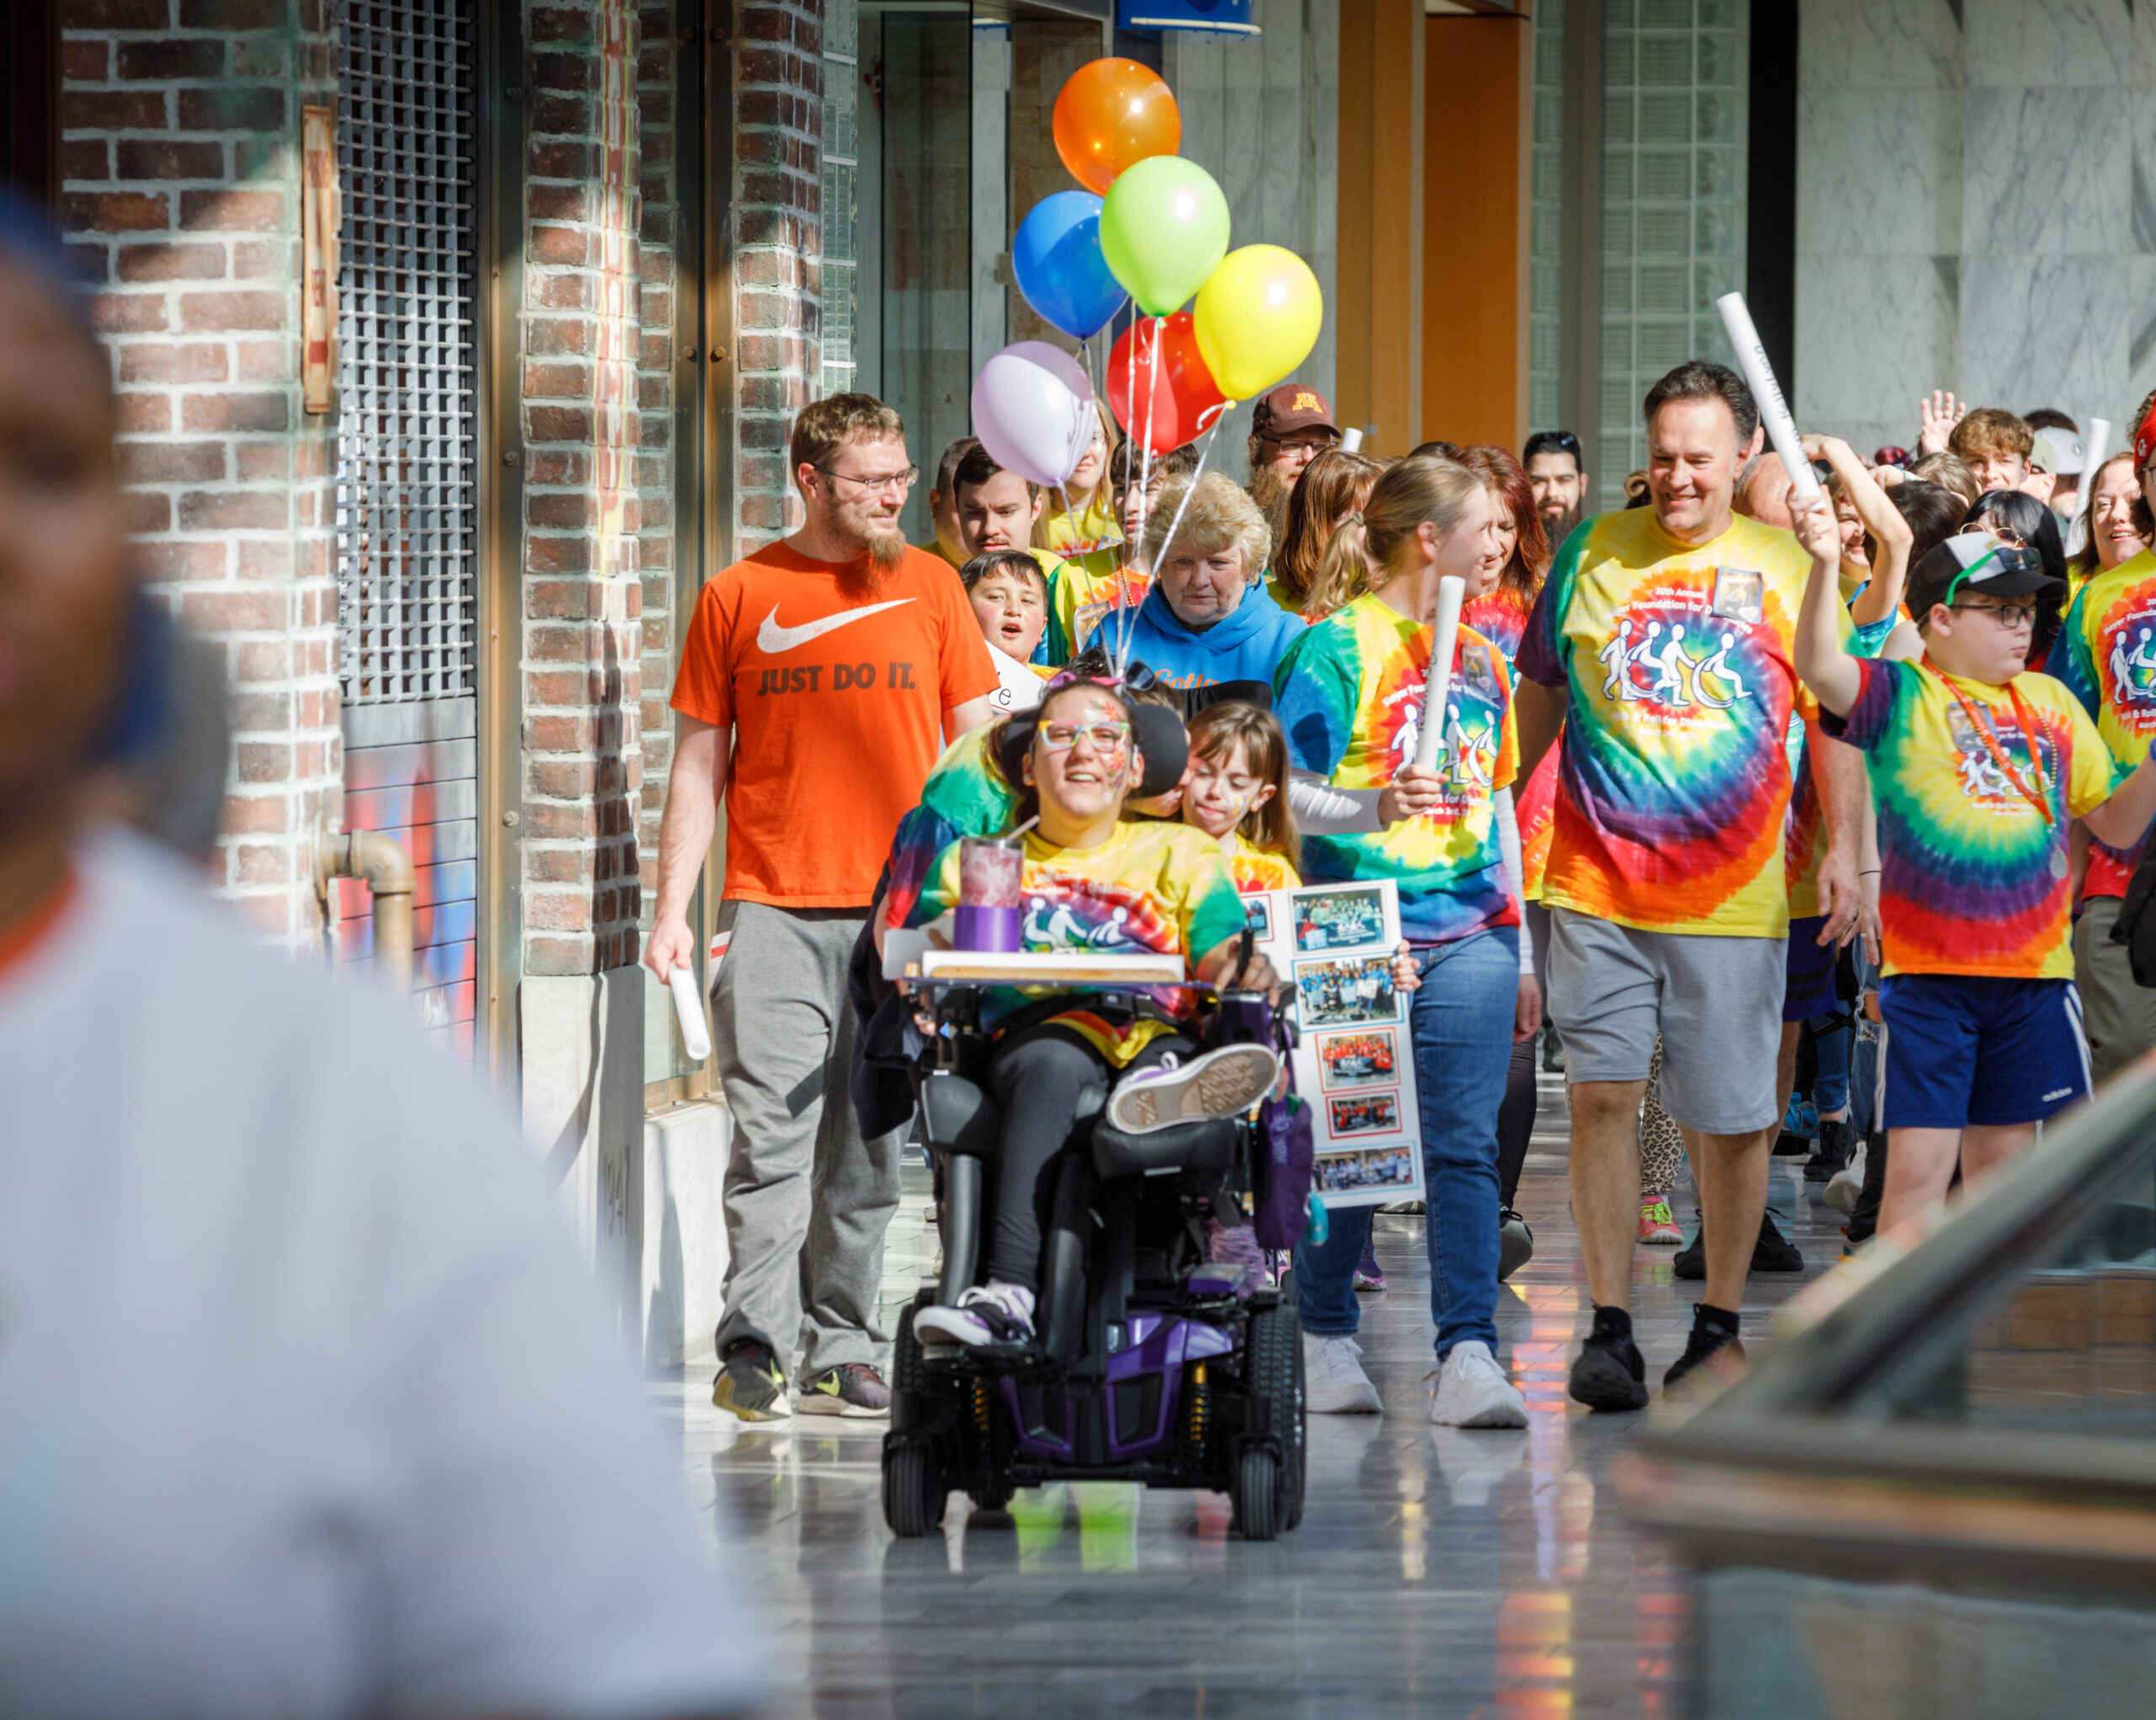 More than 400 people participated in the Walk & Roll for Disabilities at Oak View Mall&period;